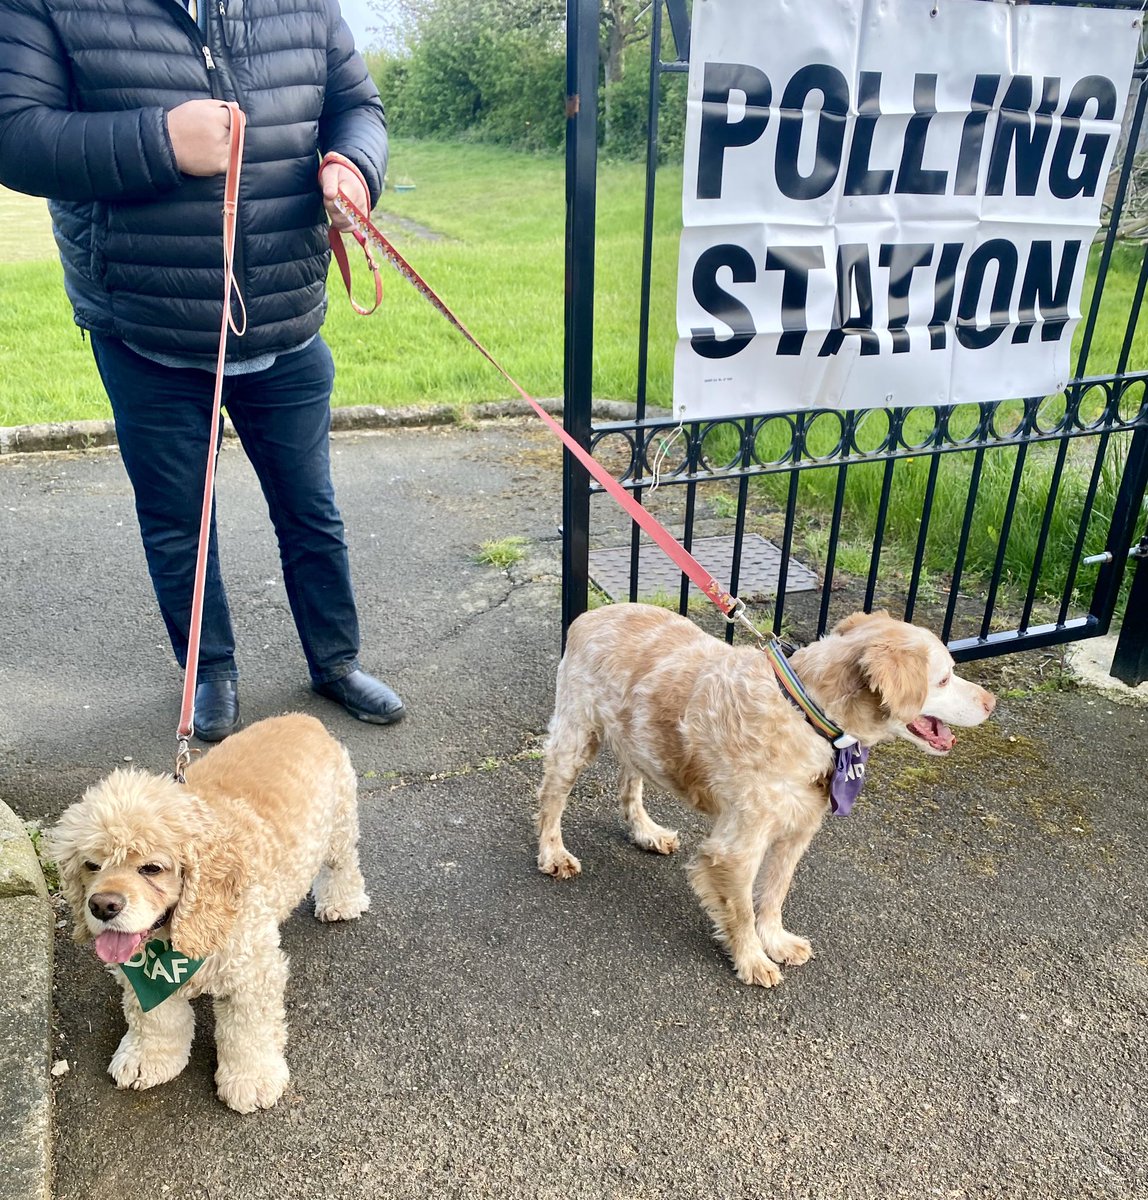 We have done our civic duty & walked mum & dad to the #PollingStation to #Vote #DogsAtPollingStations